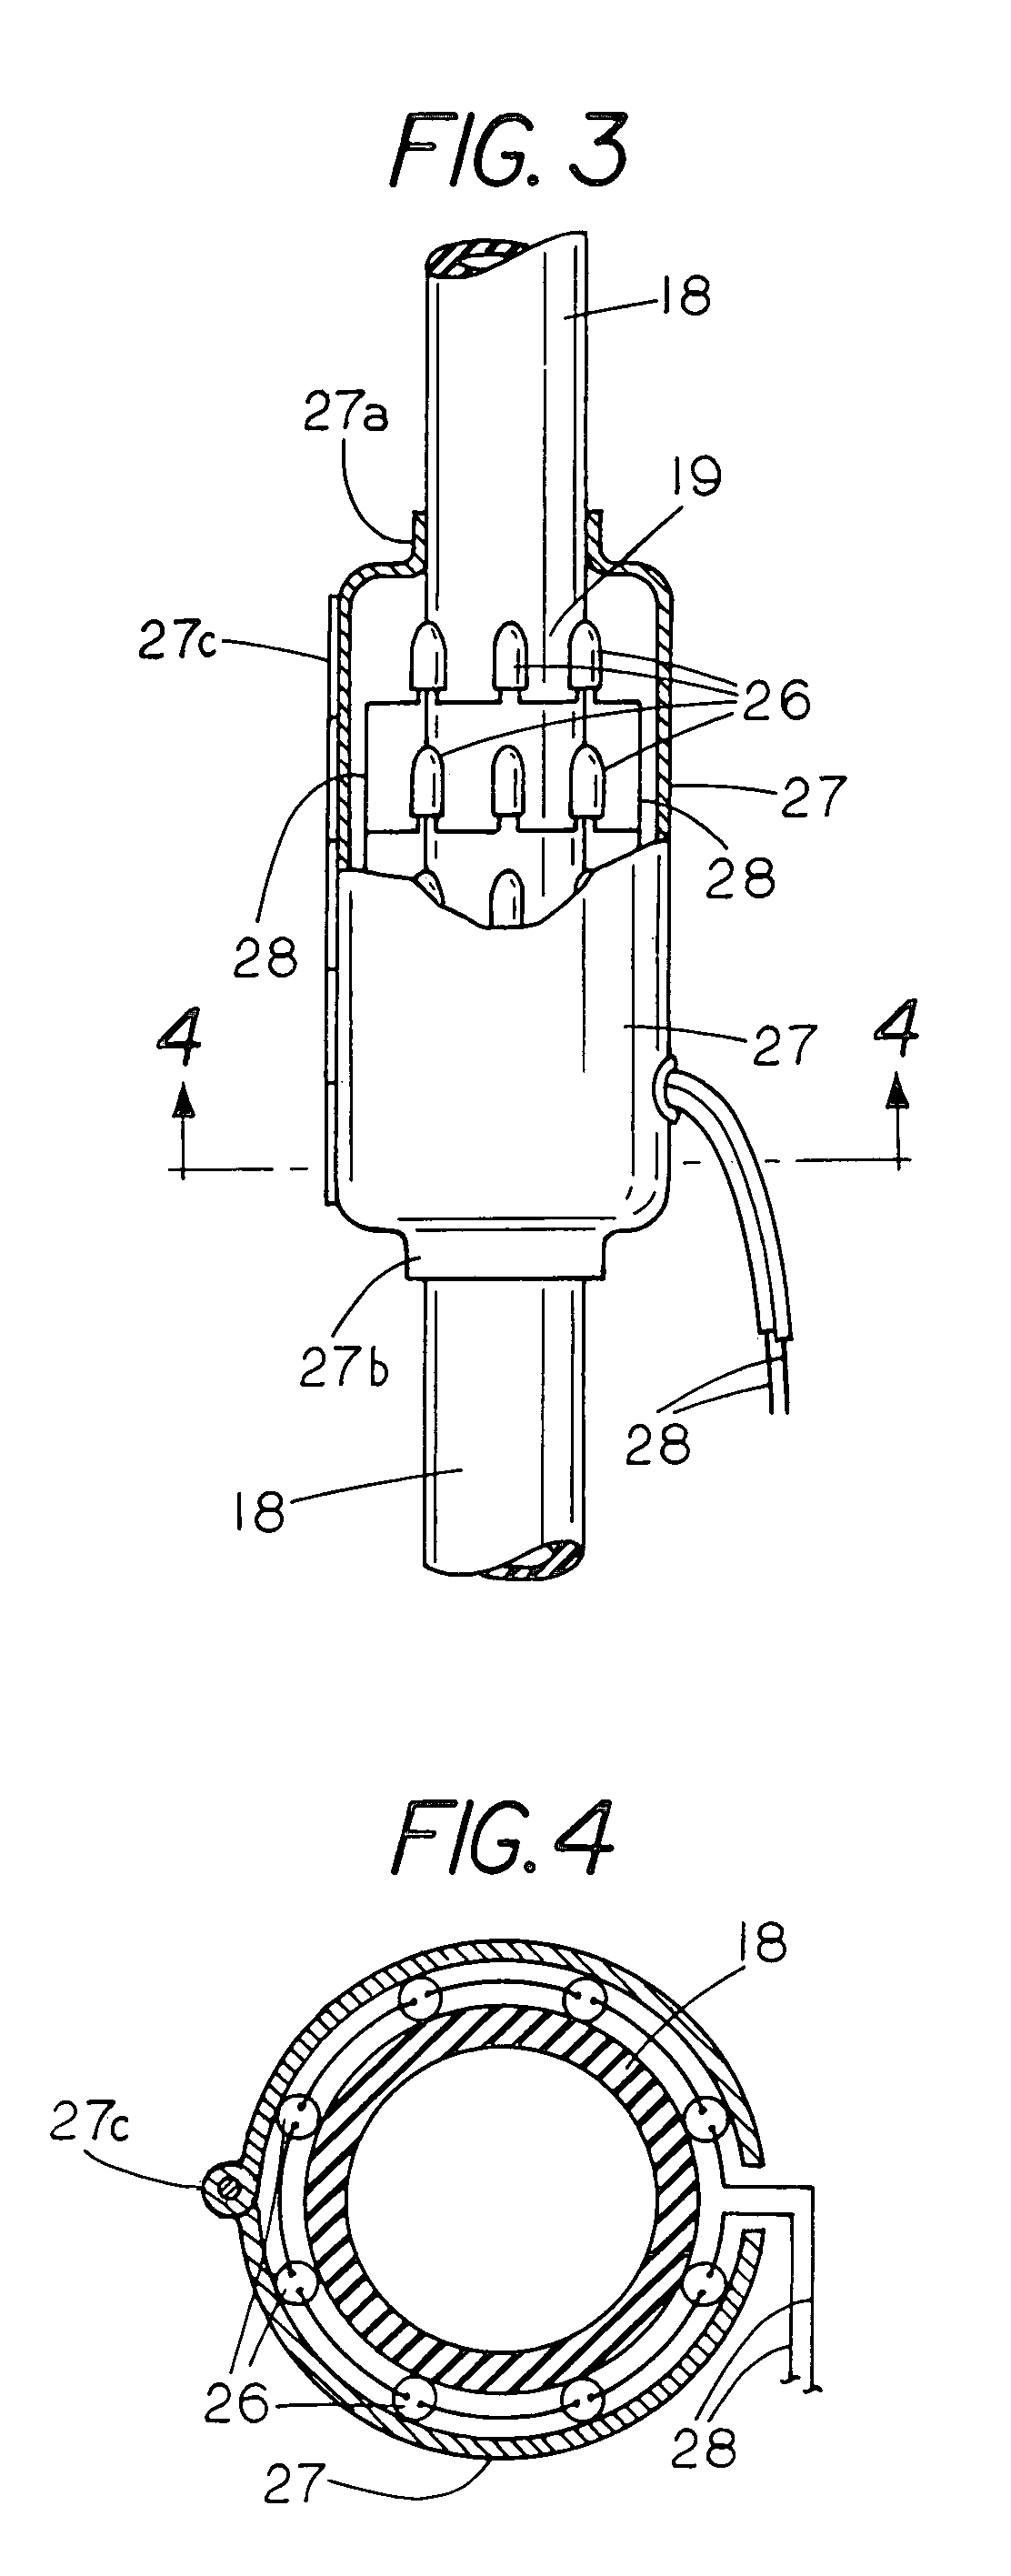 Method and apparatus for preventing dialysis graft intimal hyperplasia